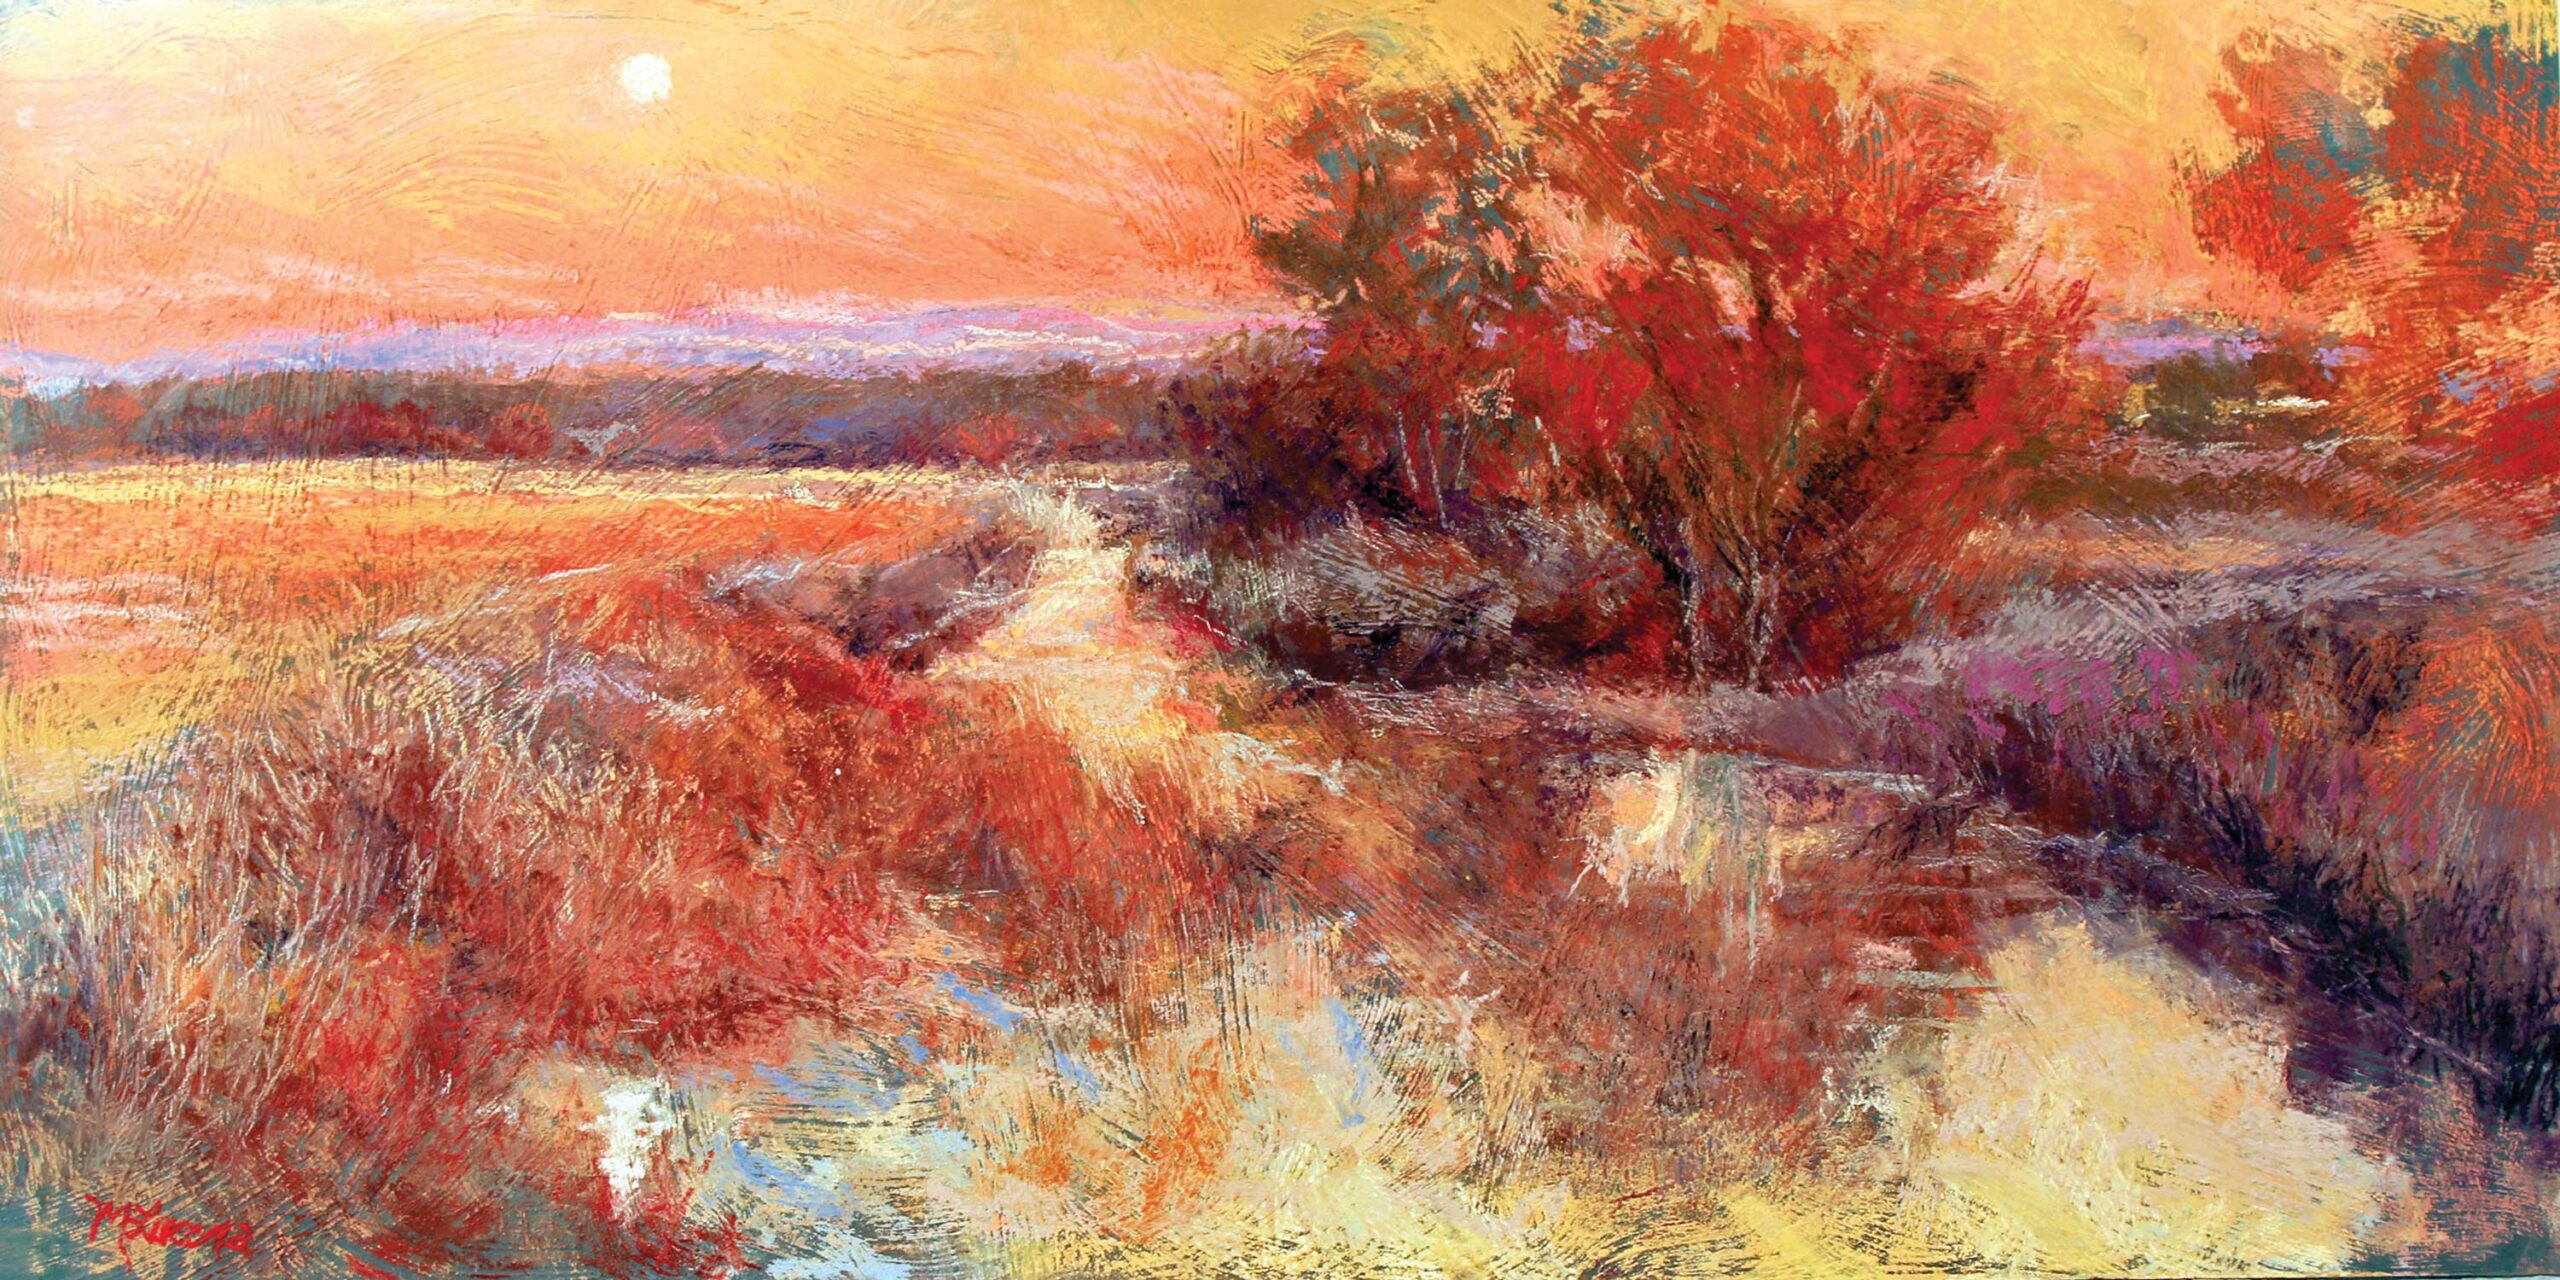 Margi Lucena, "Sunset Moon," 2021, pastel, 12 x 24 in., plein air, available from Wilder Nightingale Fin eArt, Taos, NM